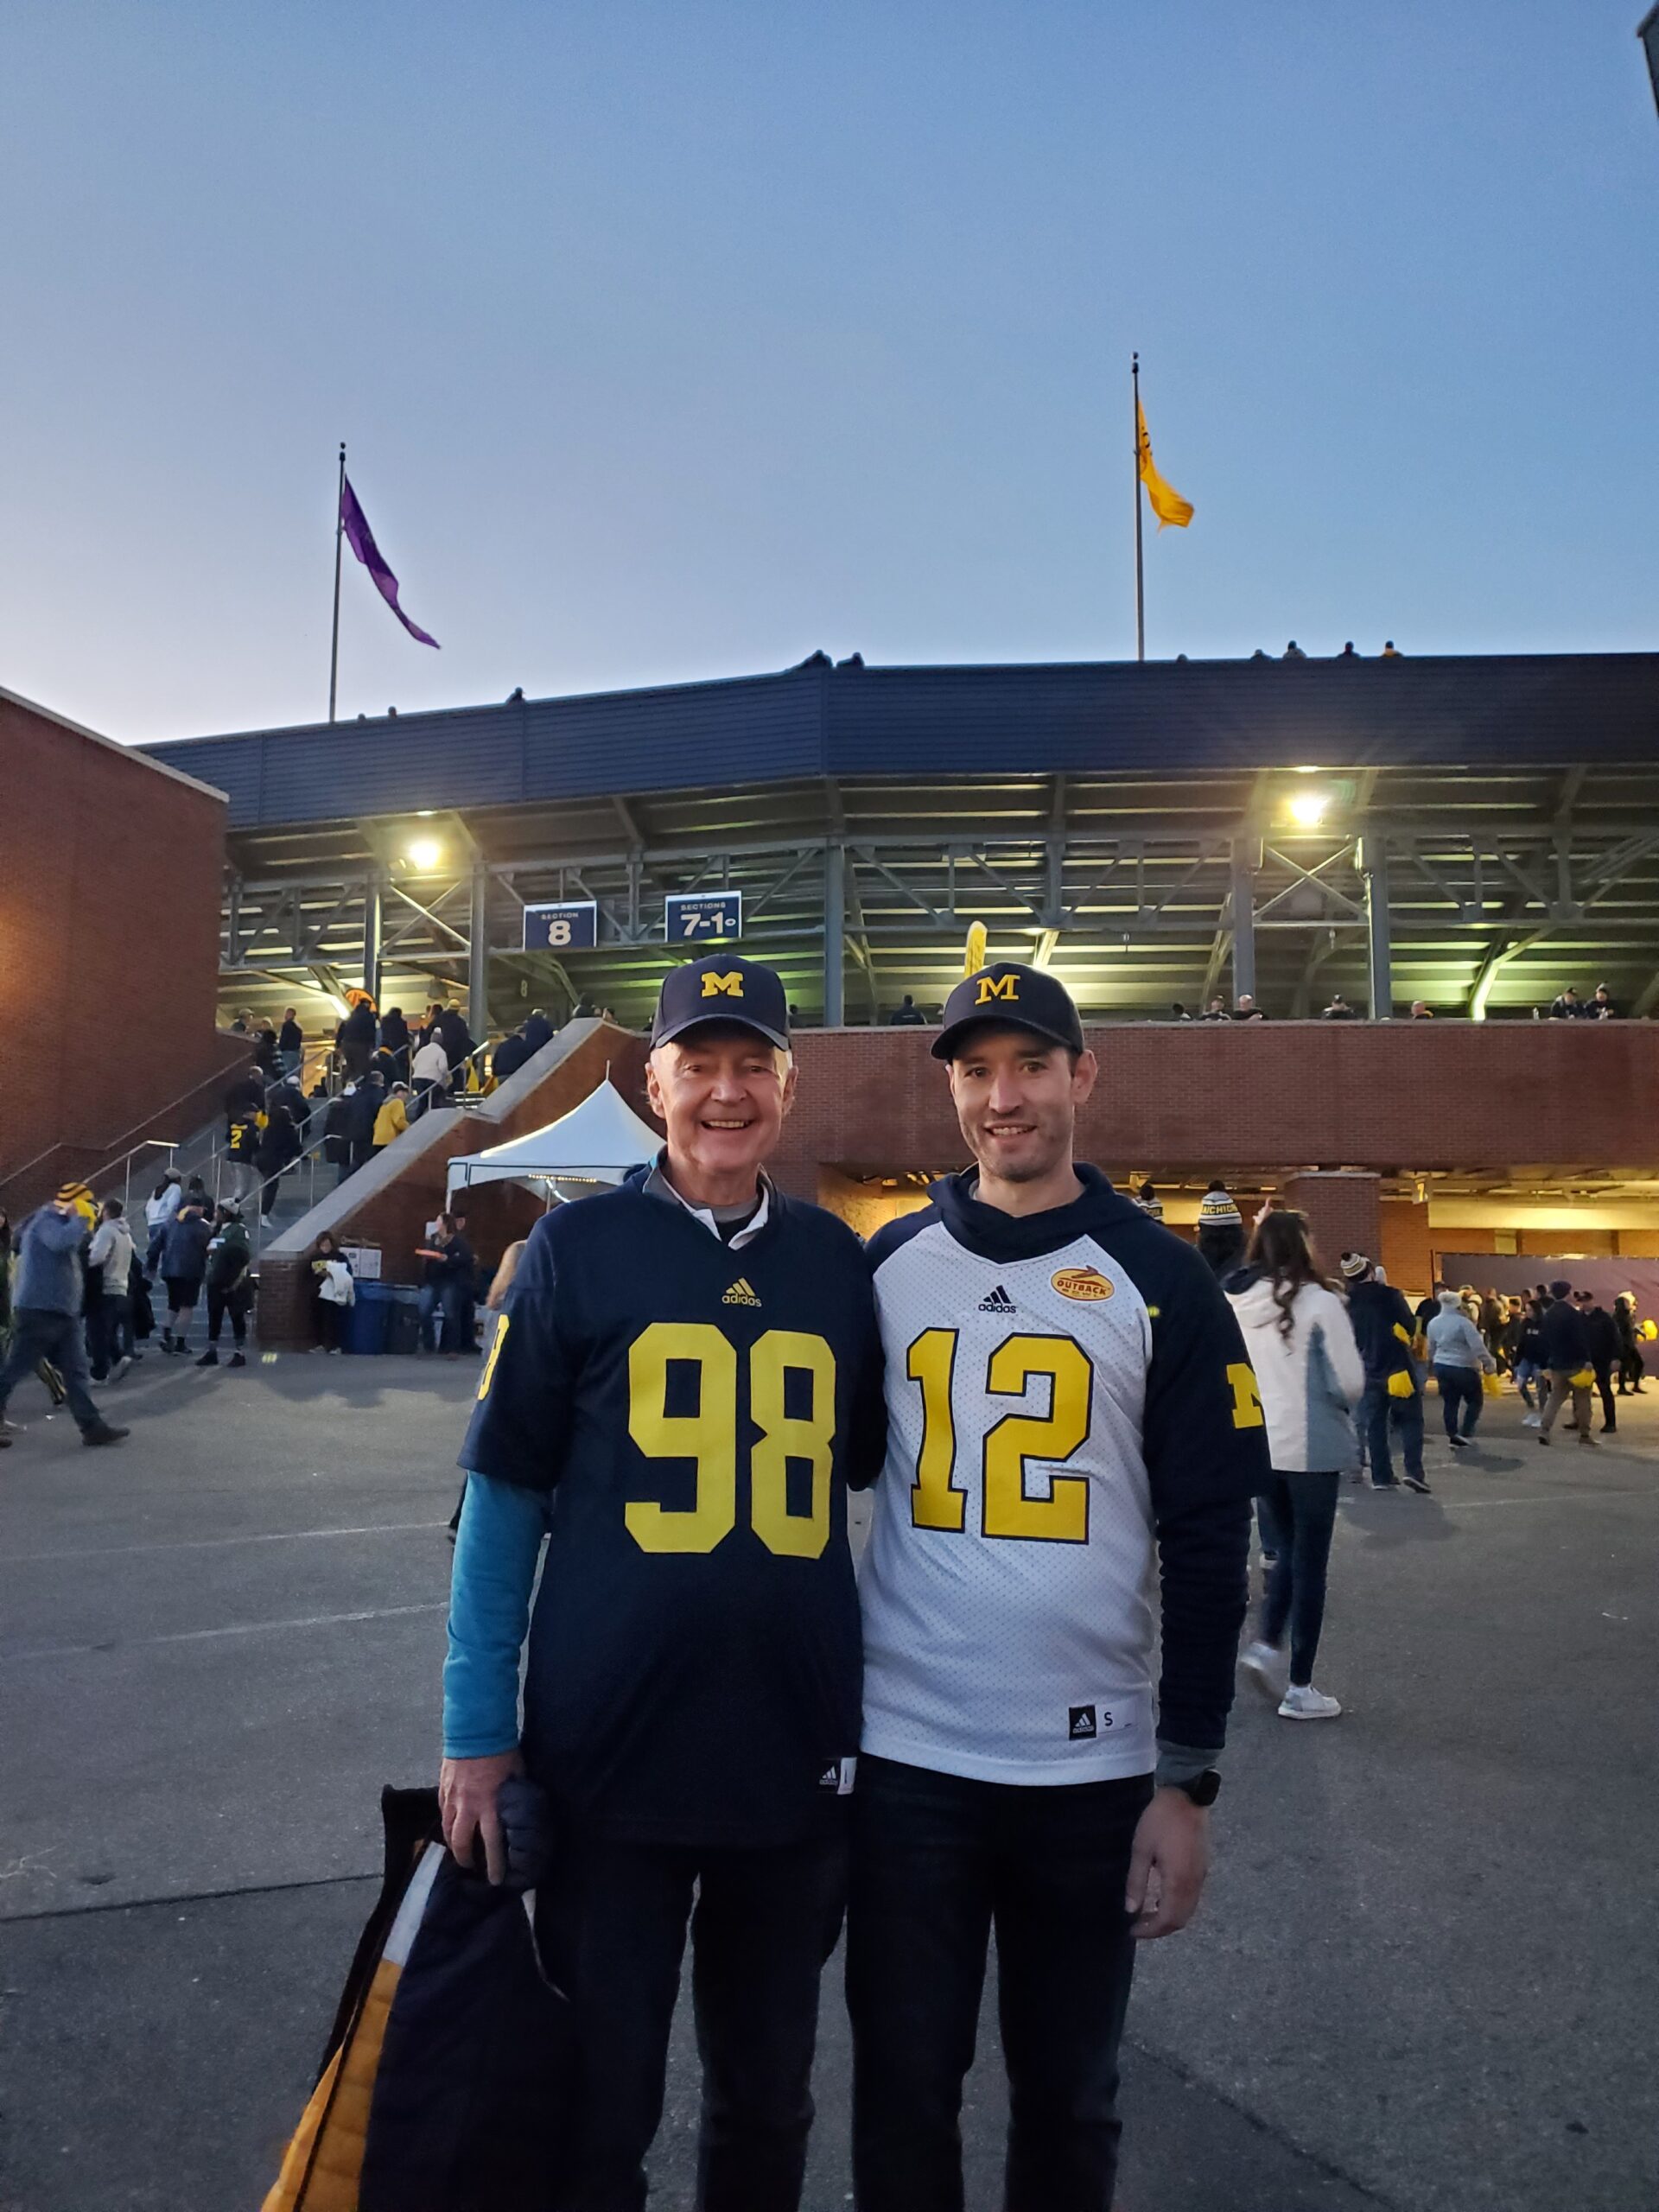 Kevin Mac Neil, MA’89, EdS’90, EdD’93, attended the annual Wolverines vs. Spartans football game with his son, Michael, PHARMD’10, in 2022. Hailing from Cape Breton, Nova Scotia, Canada, this was Kevin’s 31st year returning to Ann Arbor for the rivalry game.